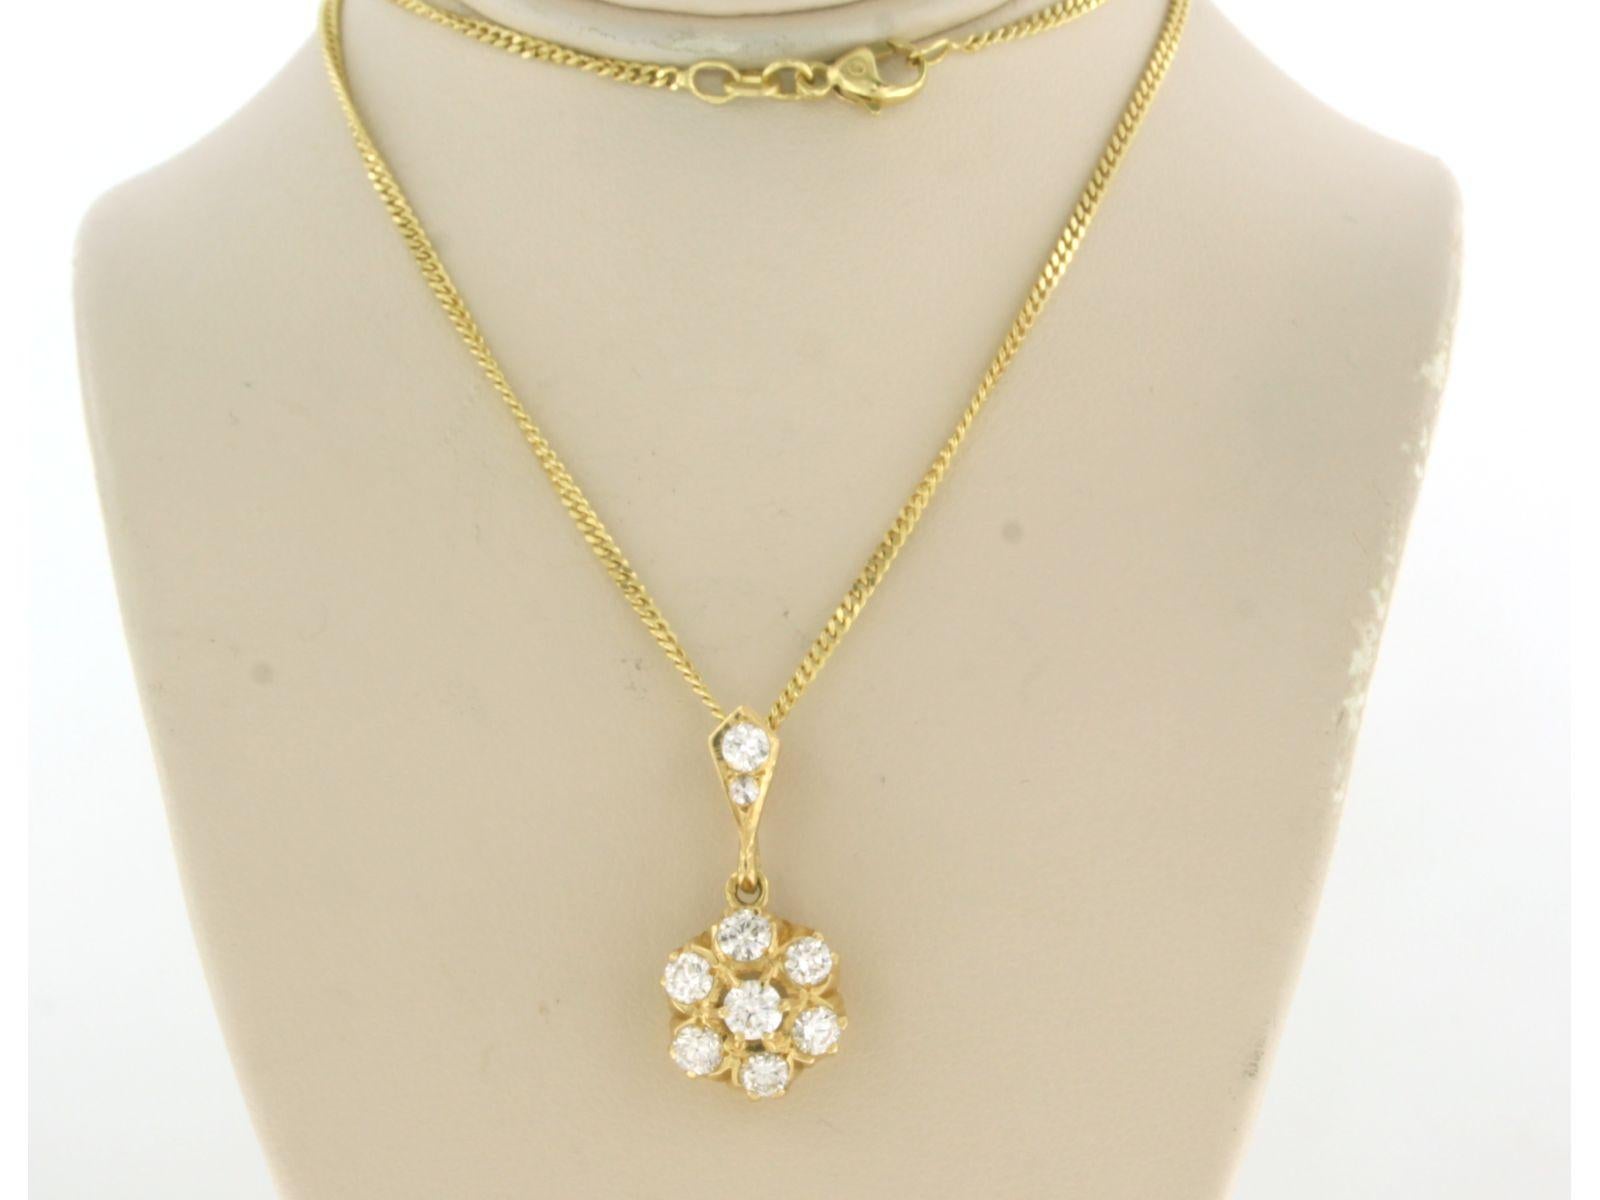 14k yellow gold necklace with an 18k yellow gold entourage pendant set with brilliant and single cut diamonds. 1.28ct - F/G - VS/SI - 45 cm long

detailed description

necklace is 45 cm long and 1.0 mm wide

size of the pendant is approximately 2.9